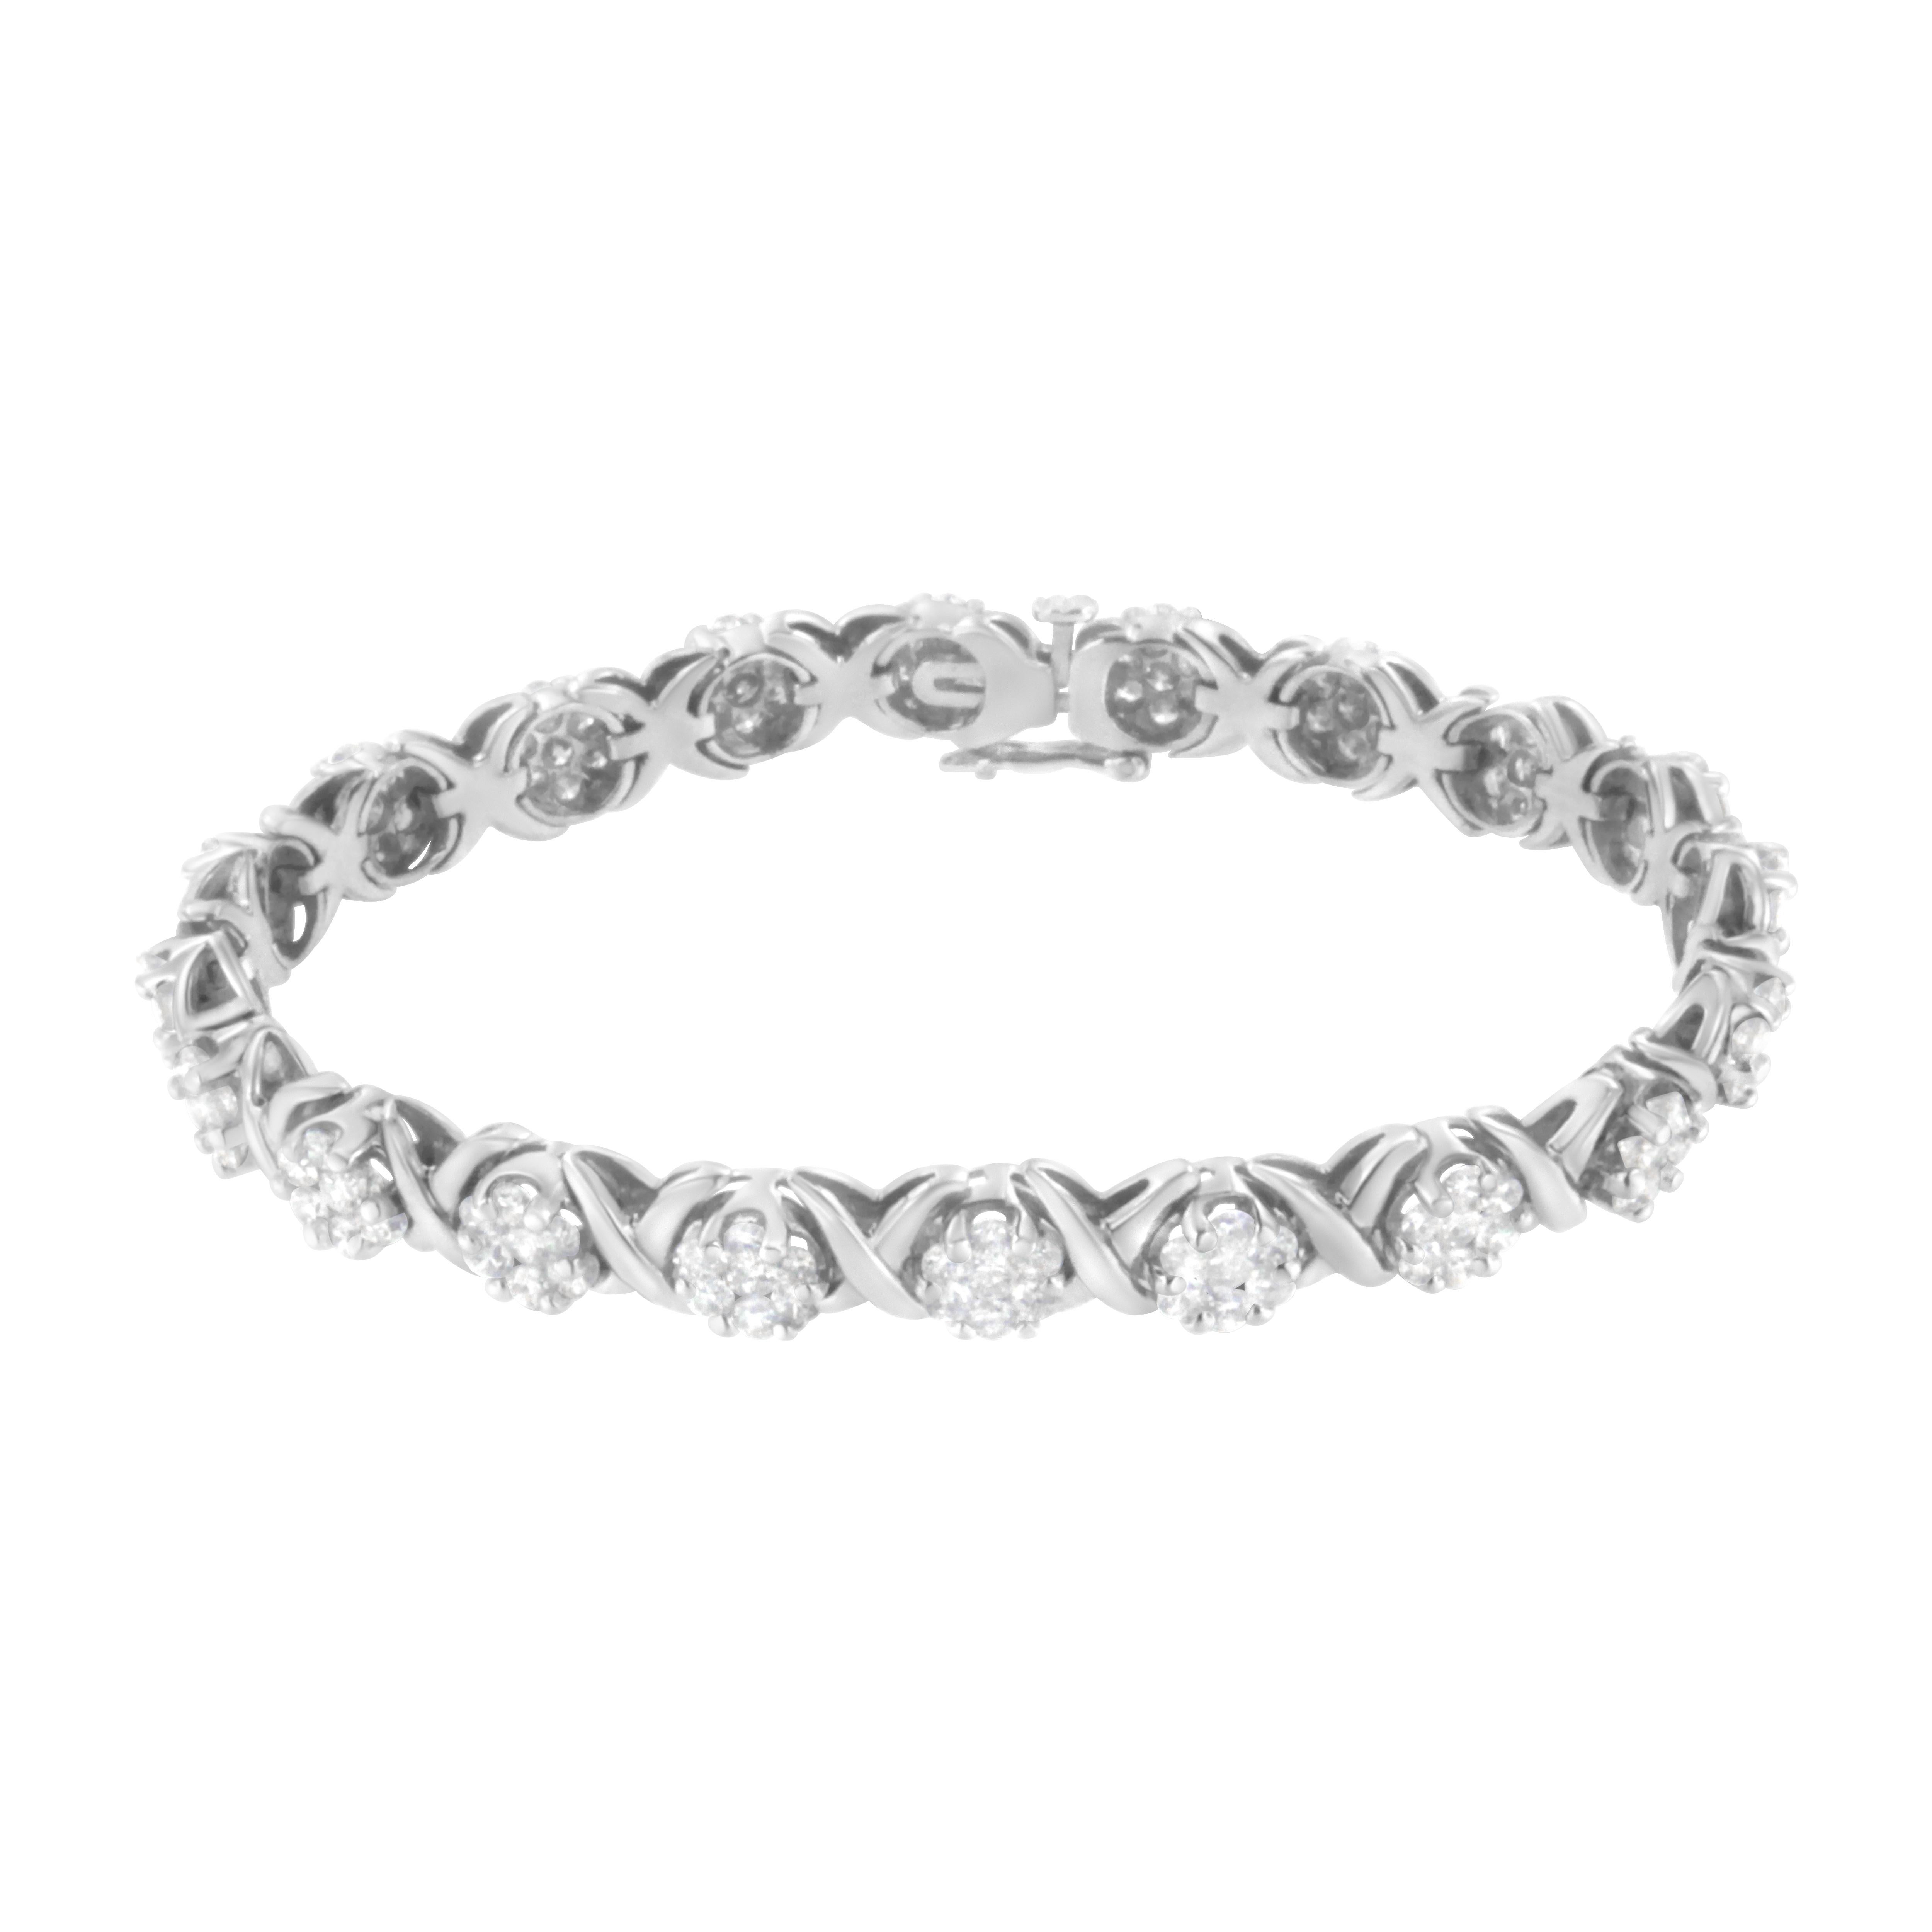 Three hundred and eight invisible set princess cut diamonds make up this breathtaking bracelet. Two sizes of geometrical shapes link to give life to this sparkling design. Fashioned in 14k white gold, this bracelet showcases 7ct TDW of diamonds. A